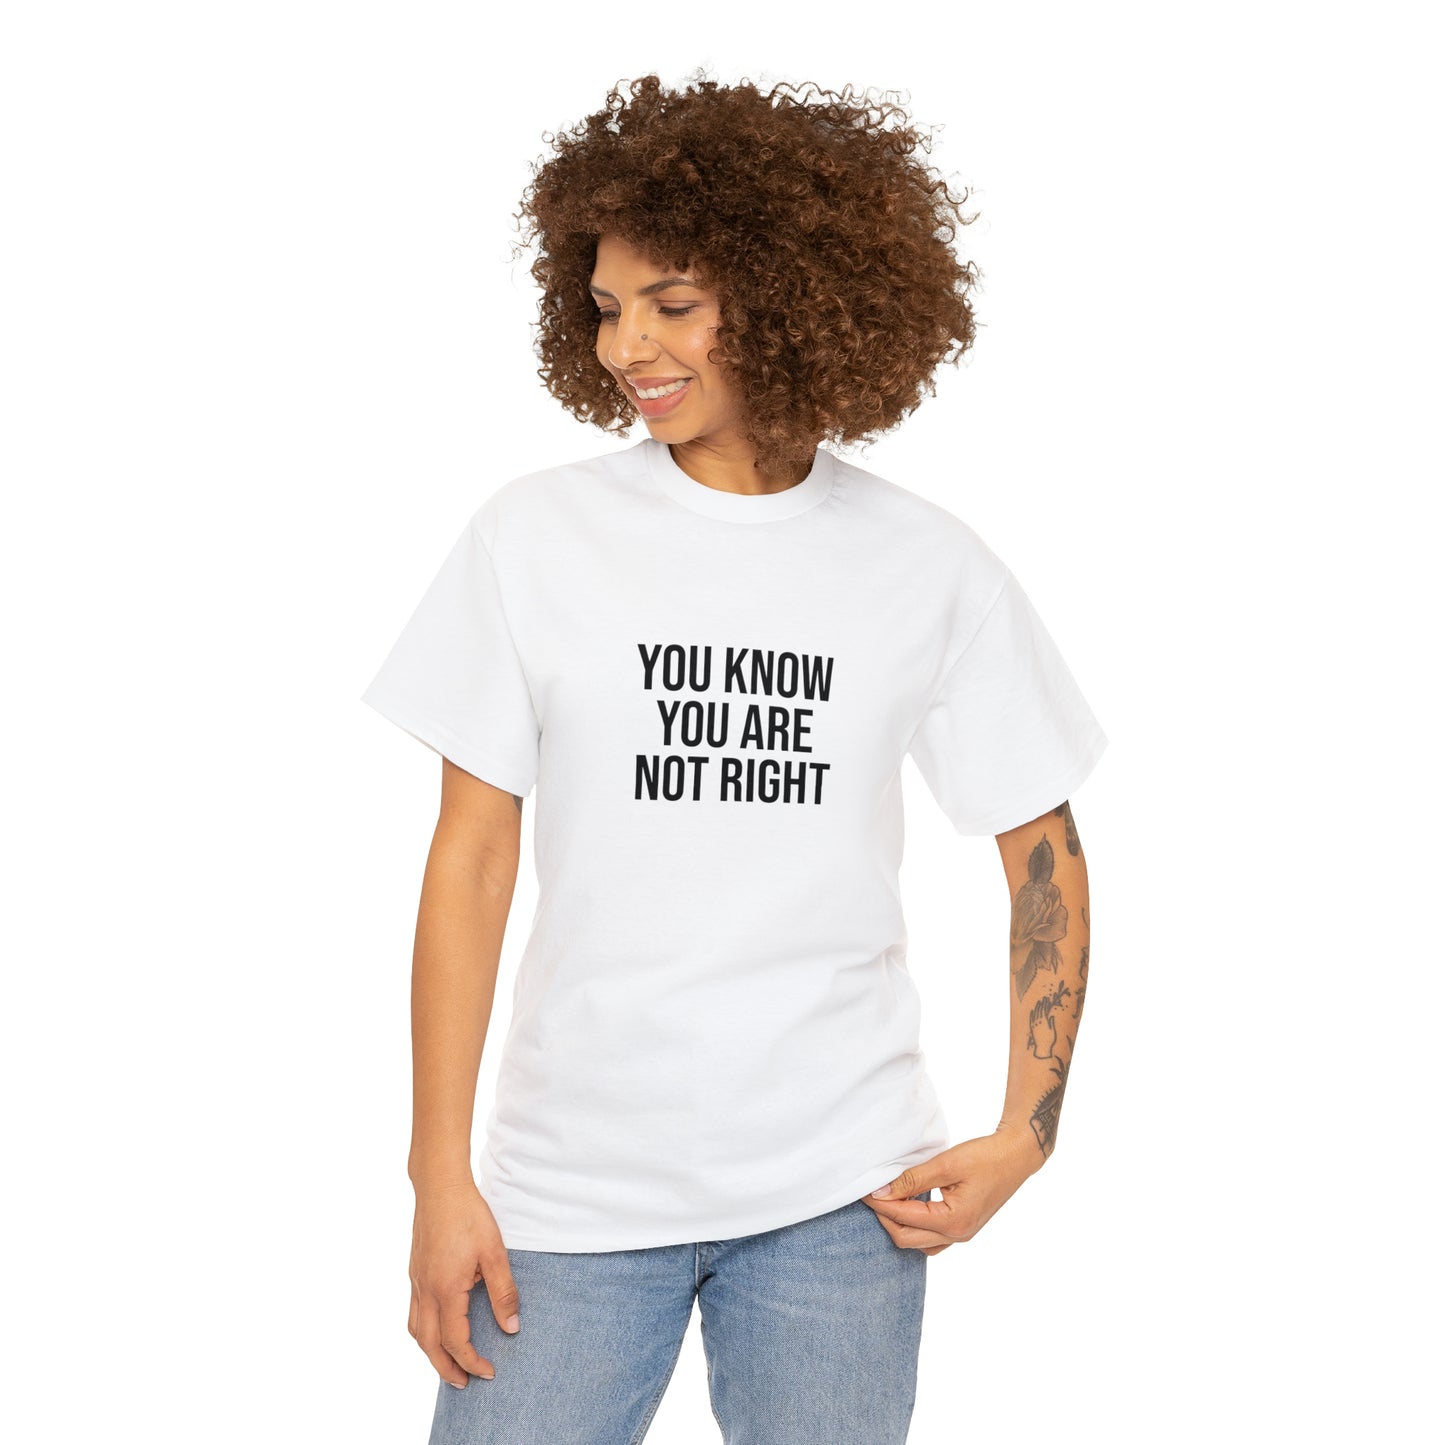 YOU'RE NOT RIGHT T-SHIRT